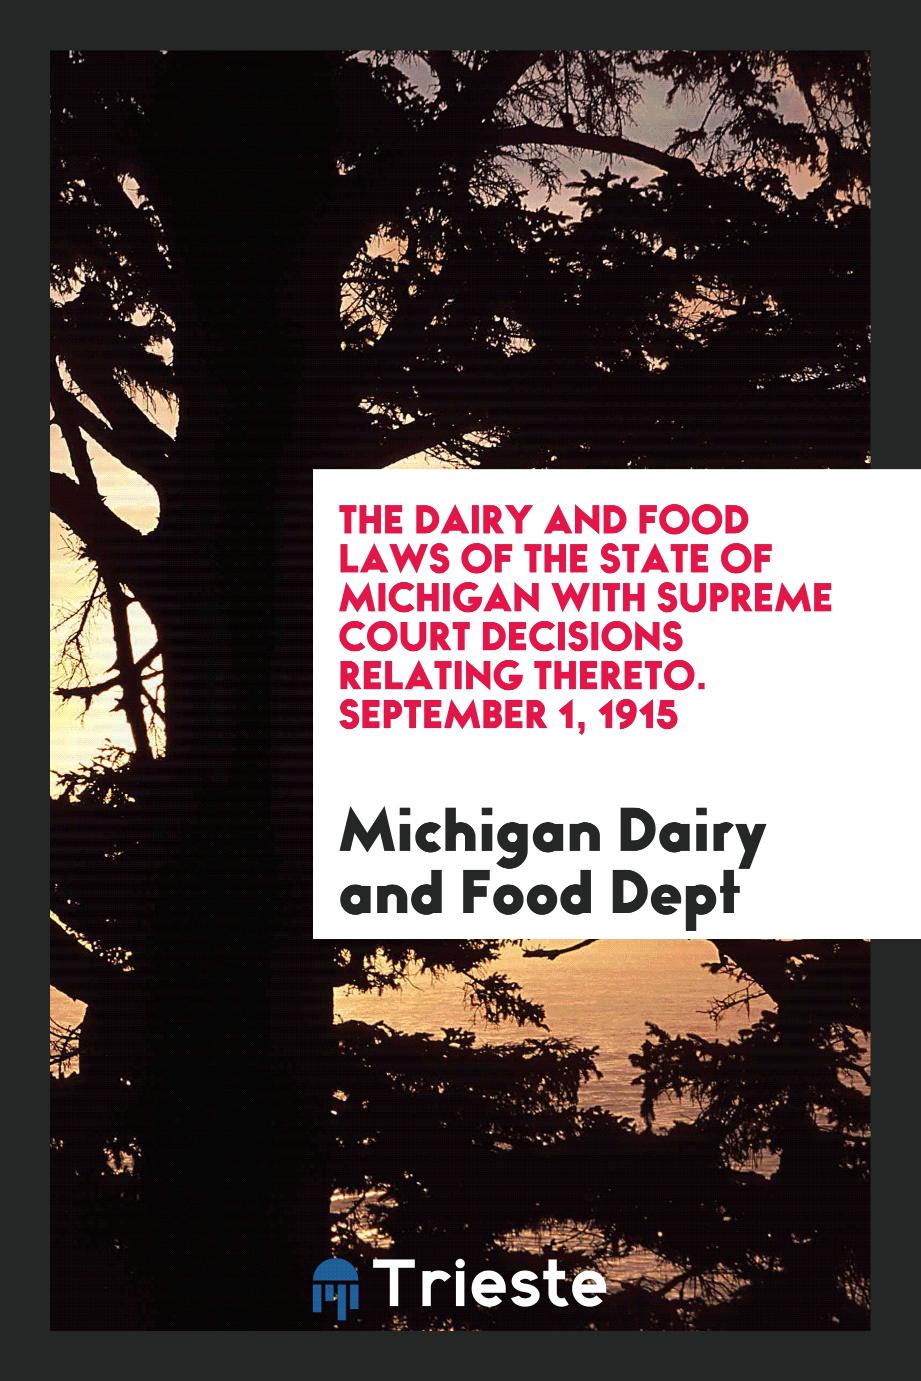 The dairy and food laws of the state of Michigan with Supreme court decisions relating thereto. September 1, 1915